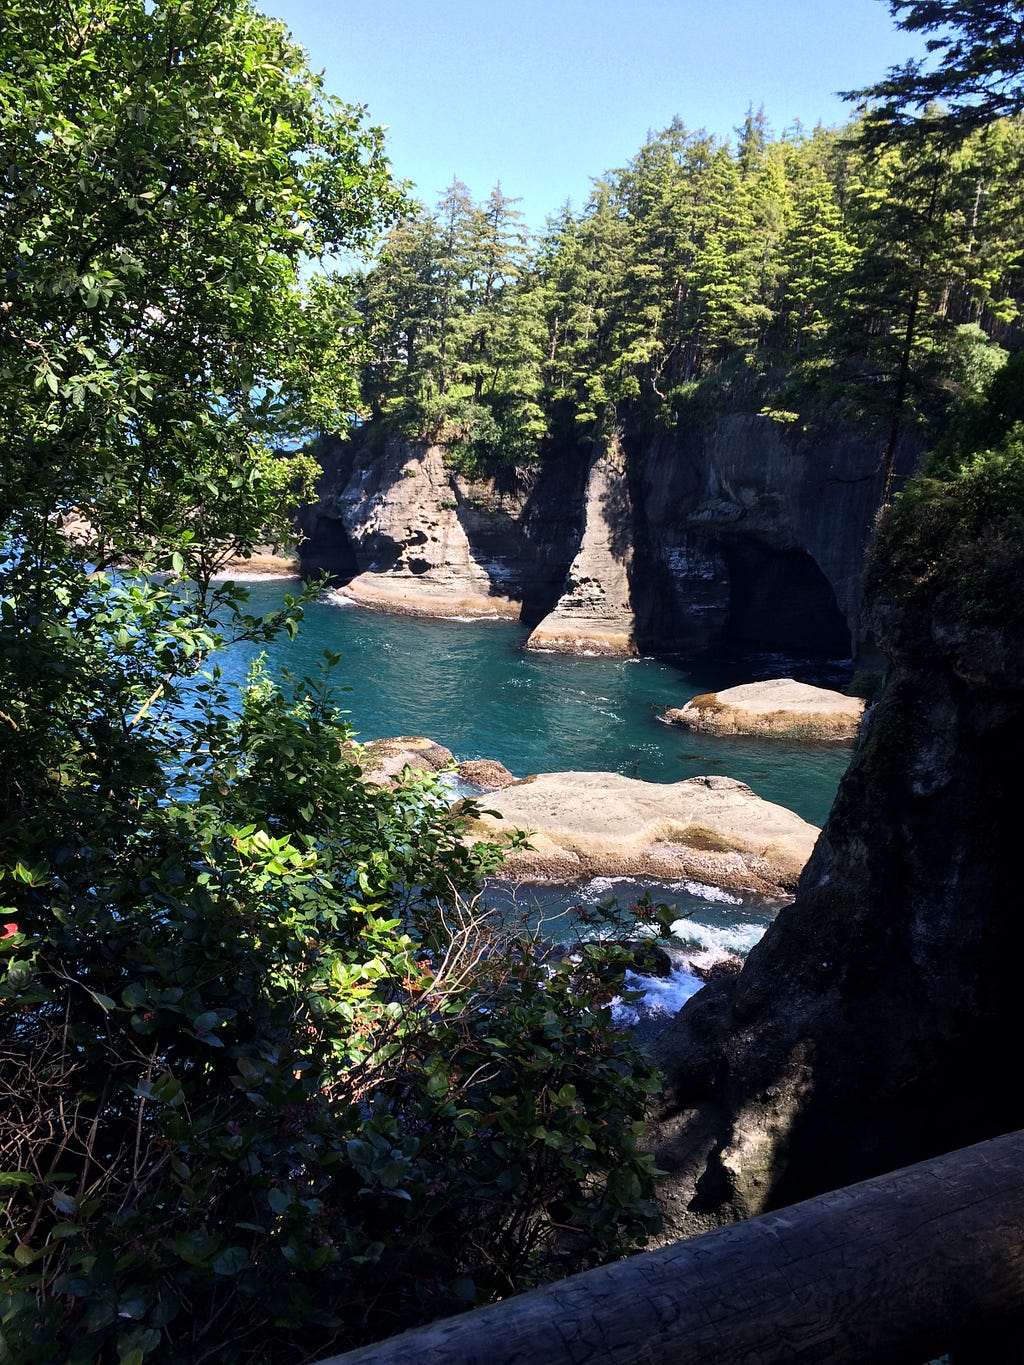 A running river surrounded by lush tress in Cape Flattery in Washington